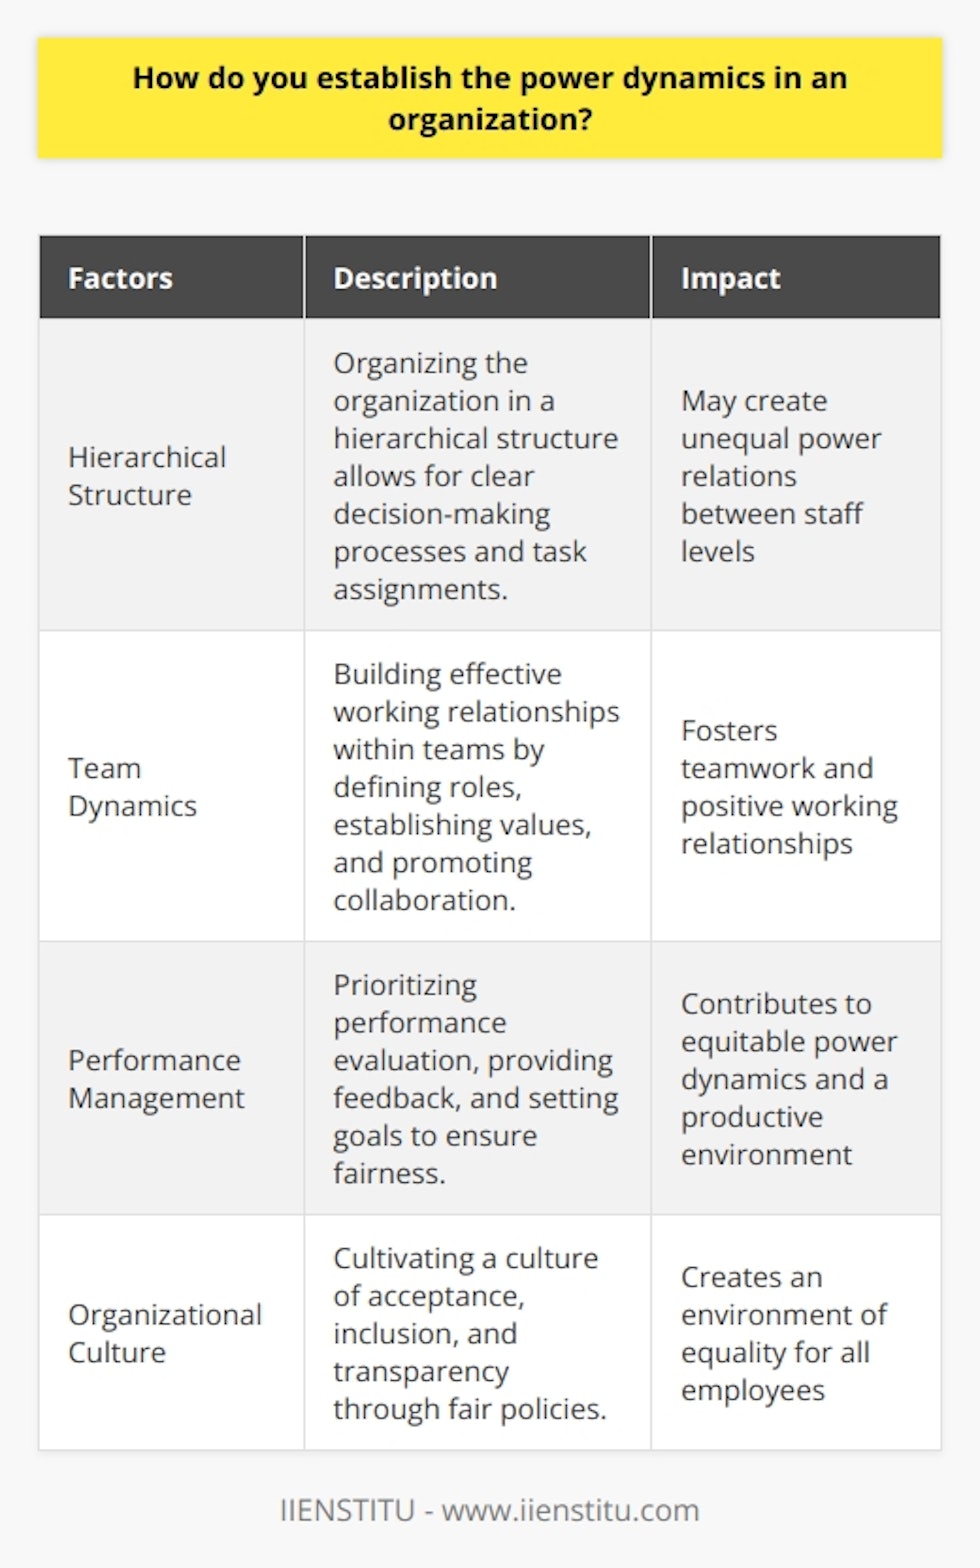 Establishing power dynamics in an organization is crucial for its success and to ensure fair and productive workplace behavior. There are several factors that contribute to the establishment of power dynamics. One factor is organizing the organization in a hierarchical structure. This structure allows for clear decision-making processes and task assignments. However, it is important to be aware that this structure can create unequal power relations between different levels of staff in the organization. Another factor is team dynamics. Building effective working relationships within teams is vital for success. Defining roles and responsibilities, as well as establishing unifying values and practices, promote collaboration and harmony among team members. Trust plays a significant role in creating positive working relationships, enabling effective communication and decision-making. Performance management practices also play a role in determining power dynamics. Prioritizing performance evaluation over factors like seniority ensures fairness. Implementing regular performance reviews, providing feedback, setting goals, and adopting agile approaches contribute to equitable power dynamics and foster a productive environment. The culture of an organization also impacts power dynamics. The organization's values, vision, and non-verbal communication all give insight into the power dynamics within. Cultivating a culture of acceptance, inclusion, and transparency through fair policies helps create an environment of equality for all employees. In conclusion, establishing power dynamics in an organization involves understanding and addressing various aspects such as hierarchical structures, team dynamics, performance management, and organizational culture. By focusing on these components, organizations can create equitable power dynamics and foster a productive and inclusive environment.